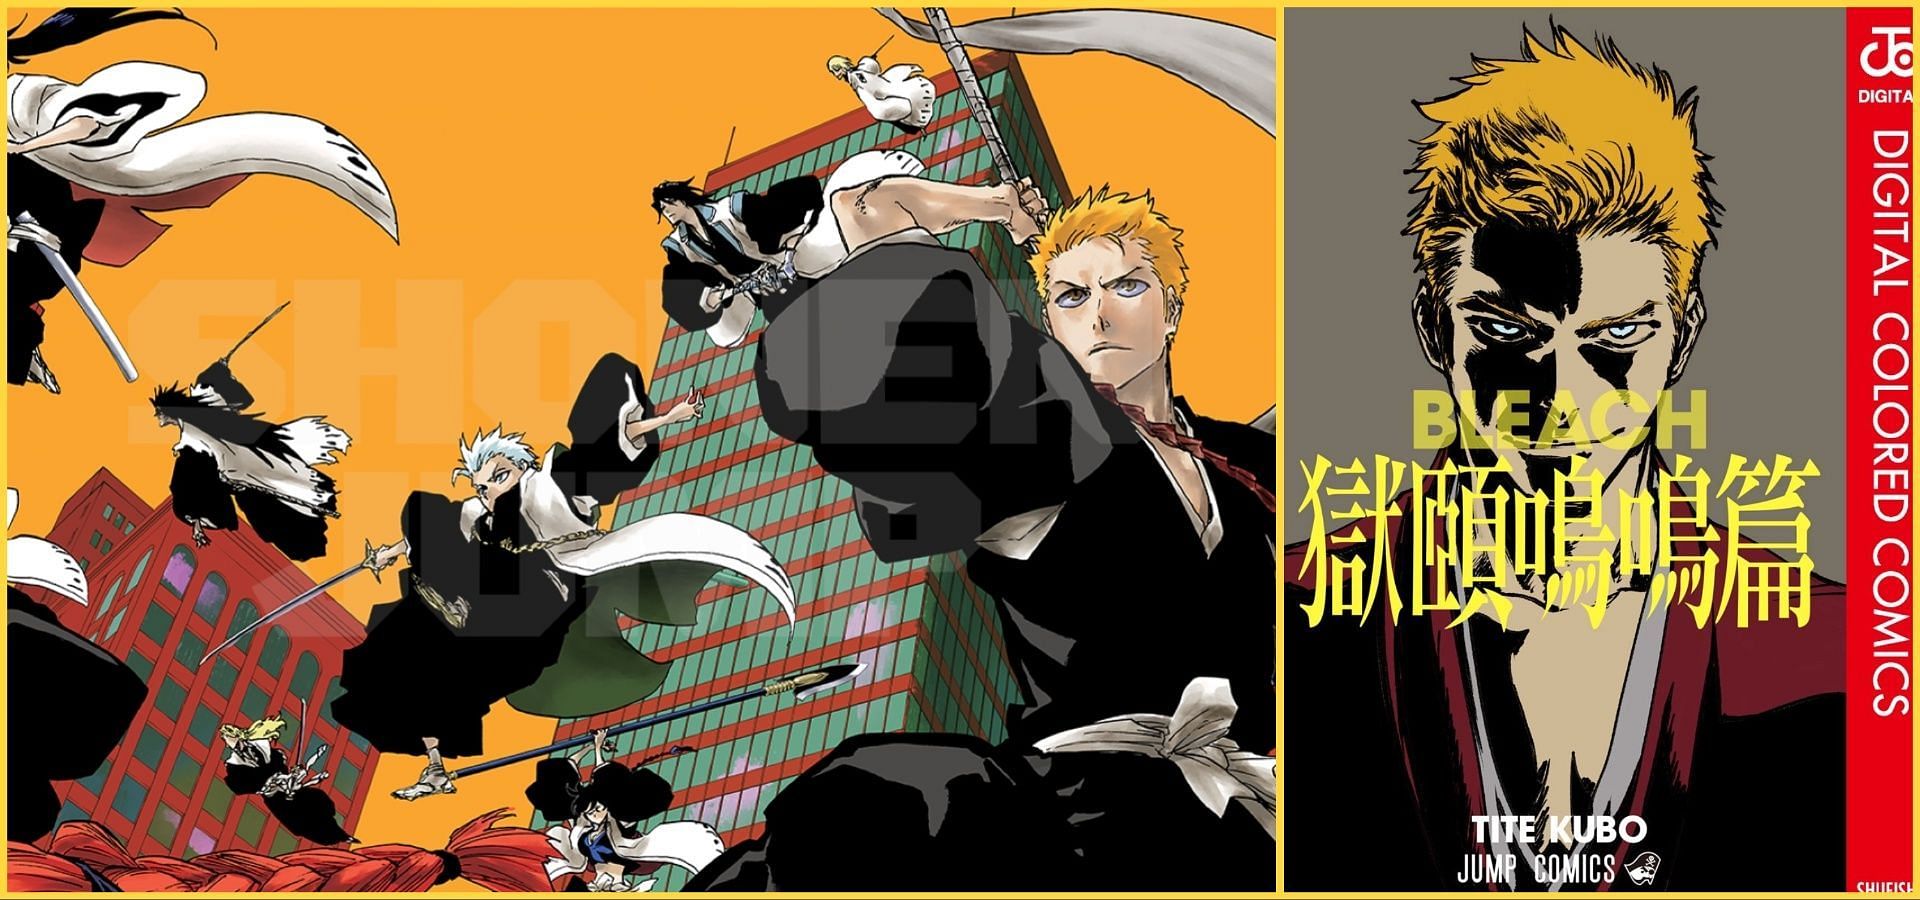 Bleach Special Hell arc OneShot unveils launch date for its fresh